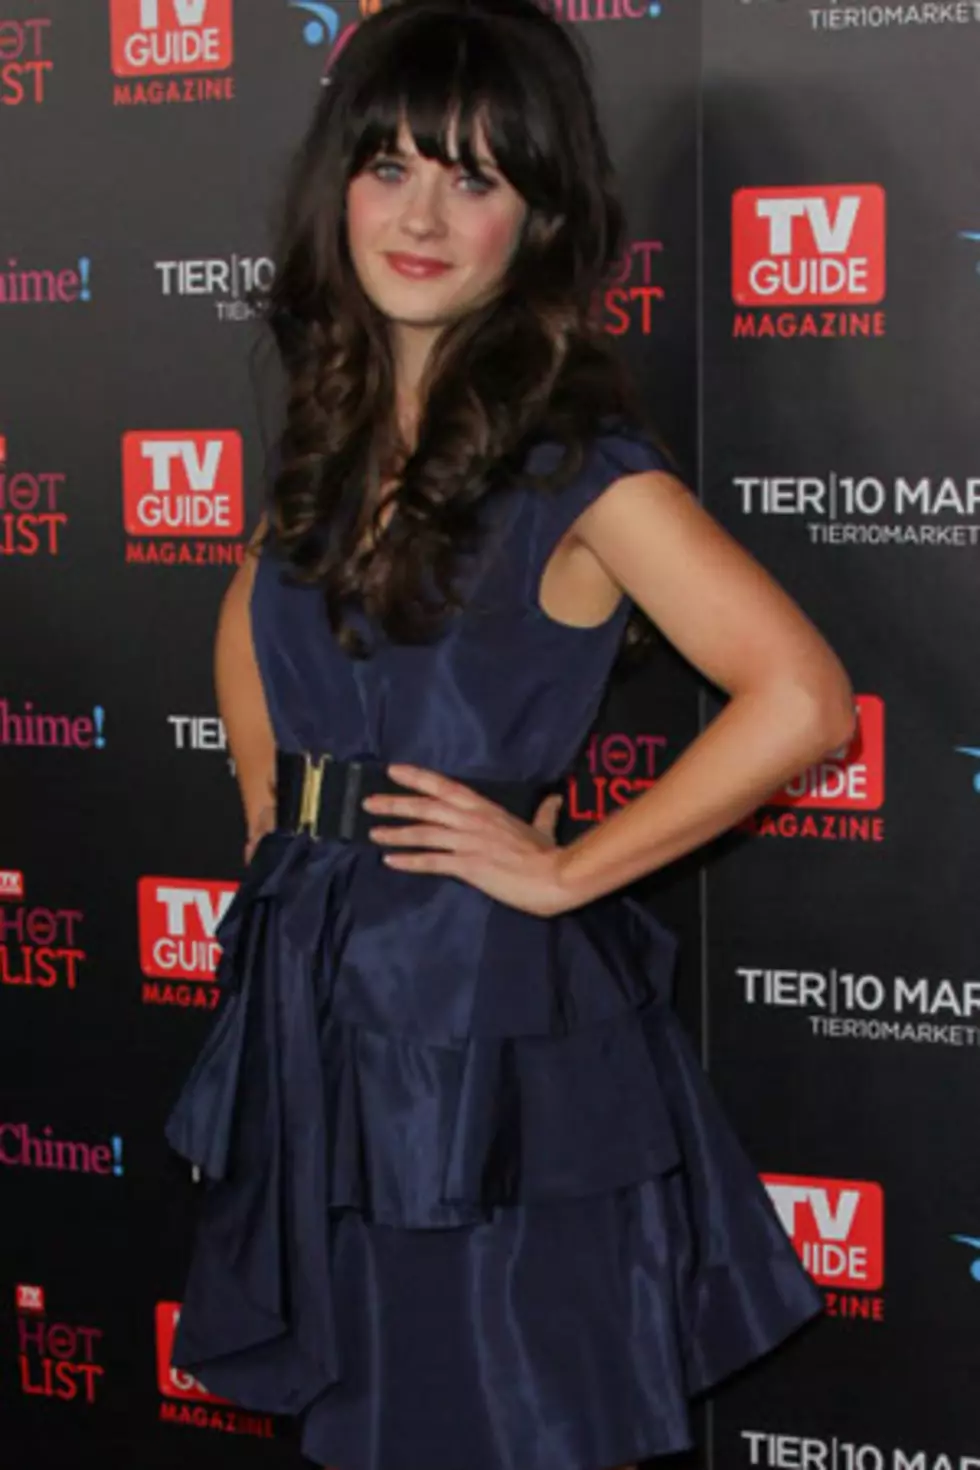 Zooey Deschanel Ditches Wedding Ring for TV Guide Hot List Party